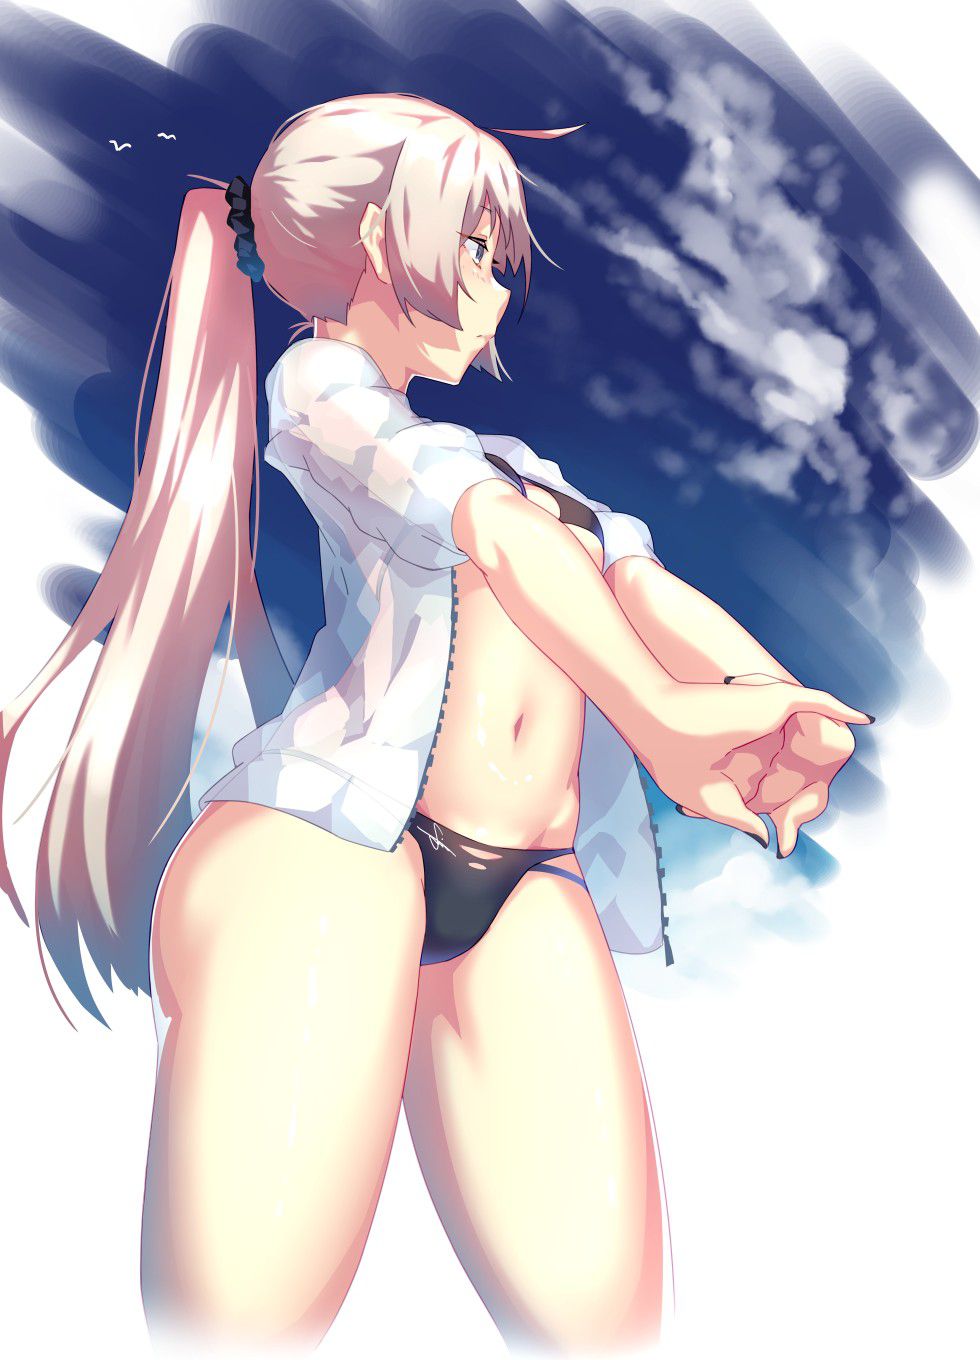 Secondary erotic image of a cute ponytail girl, 24 [ponytail] 2